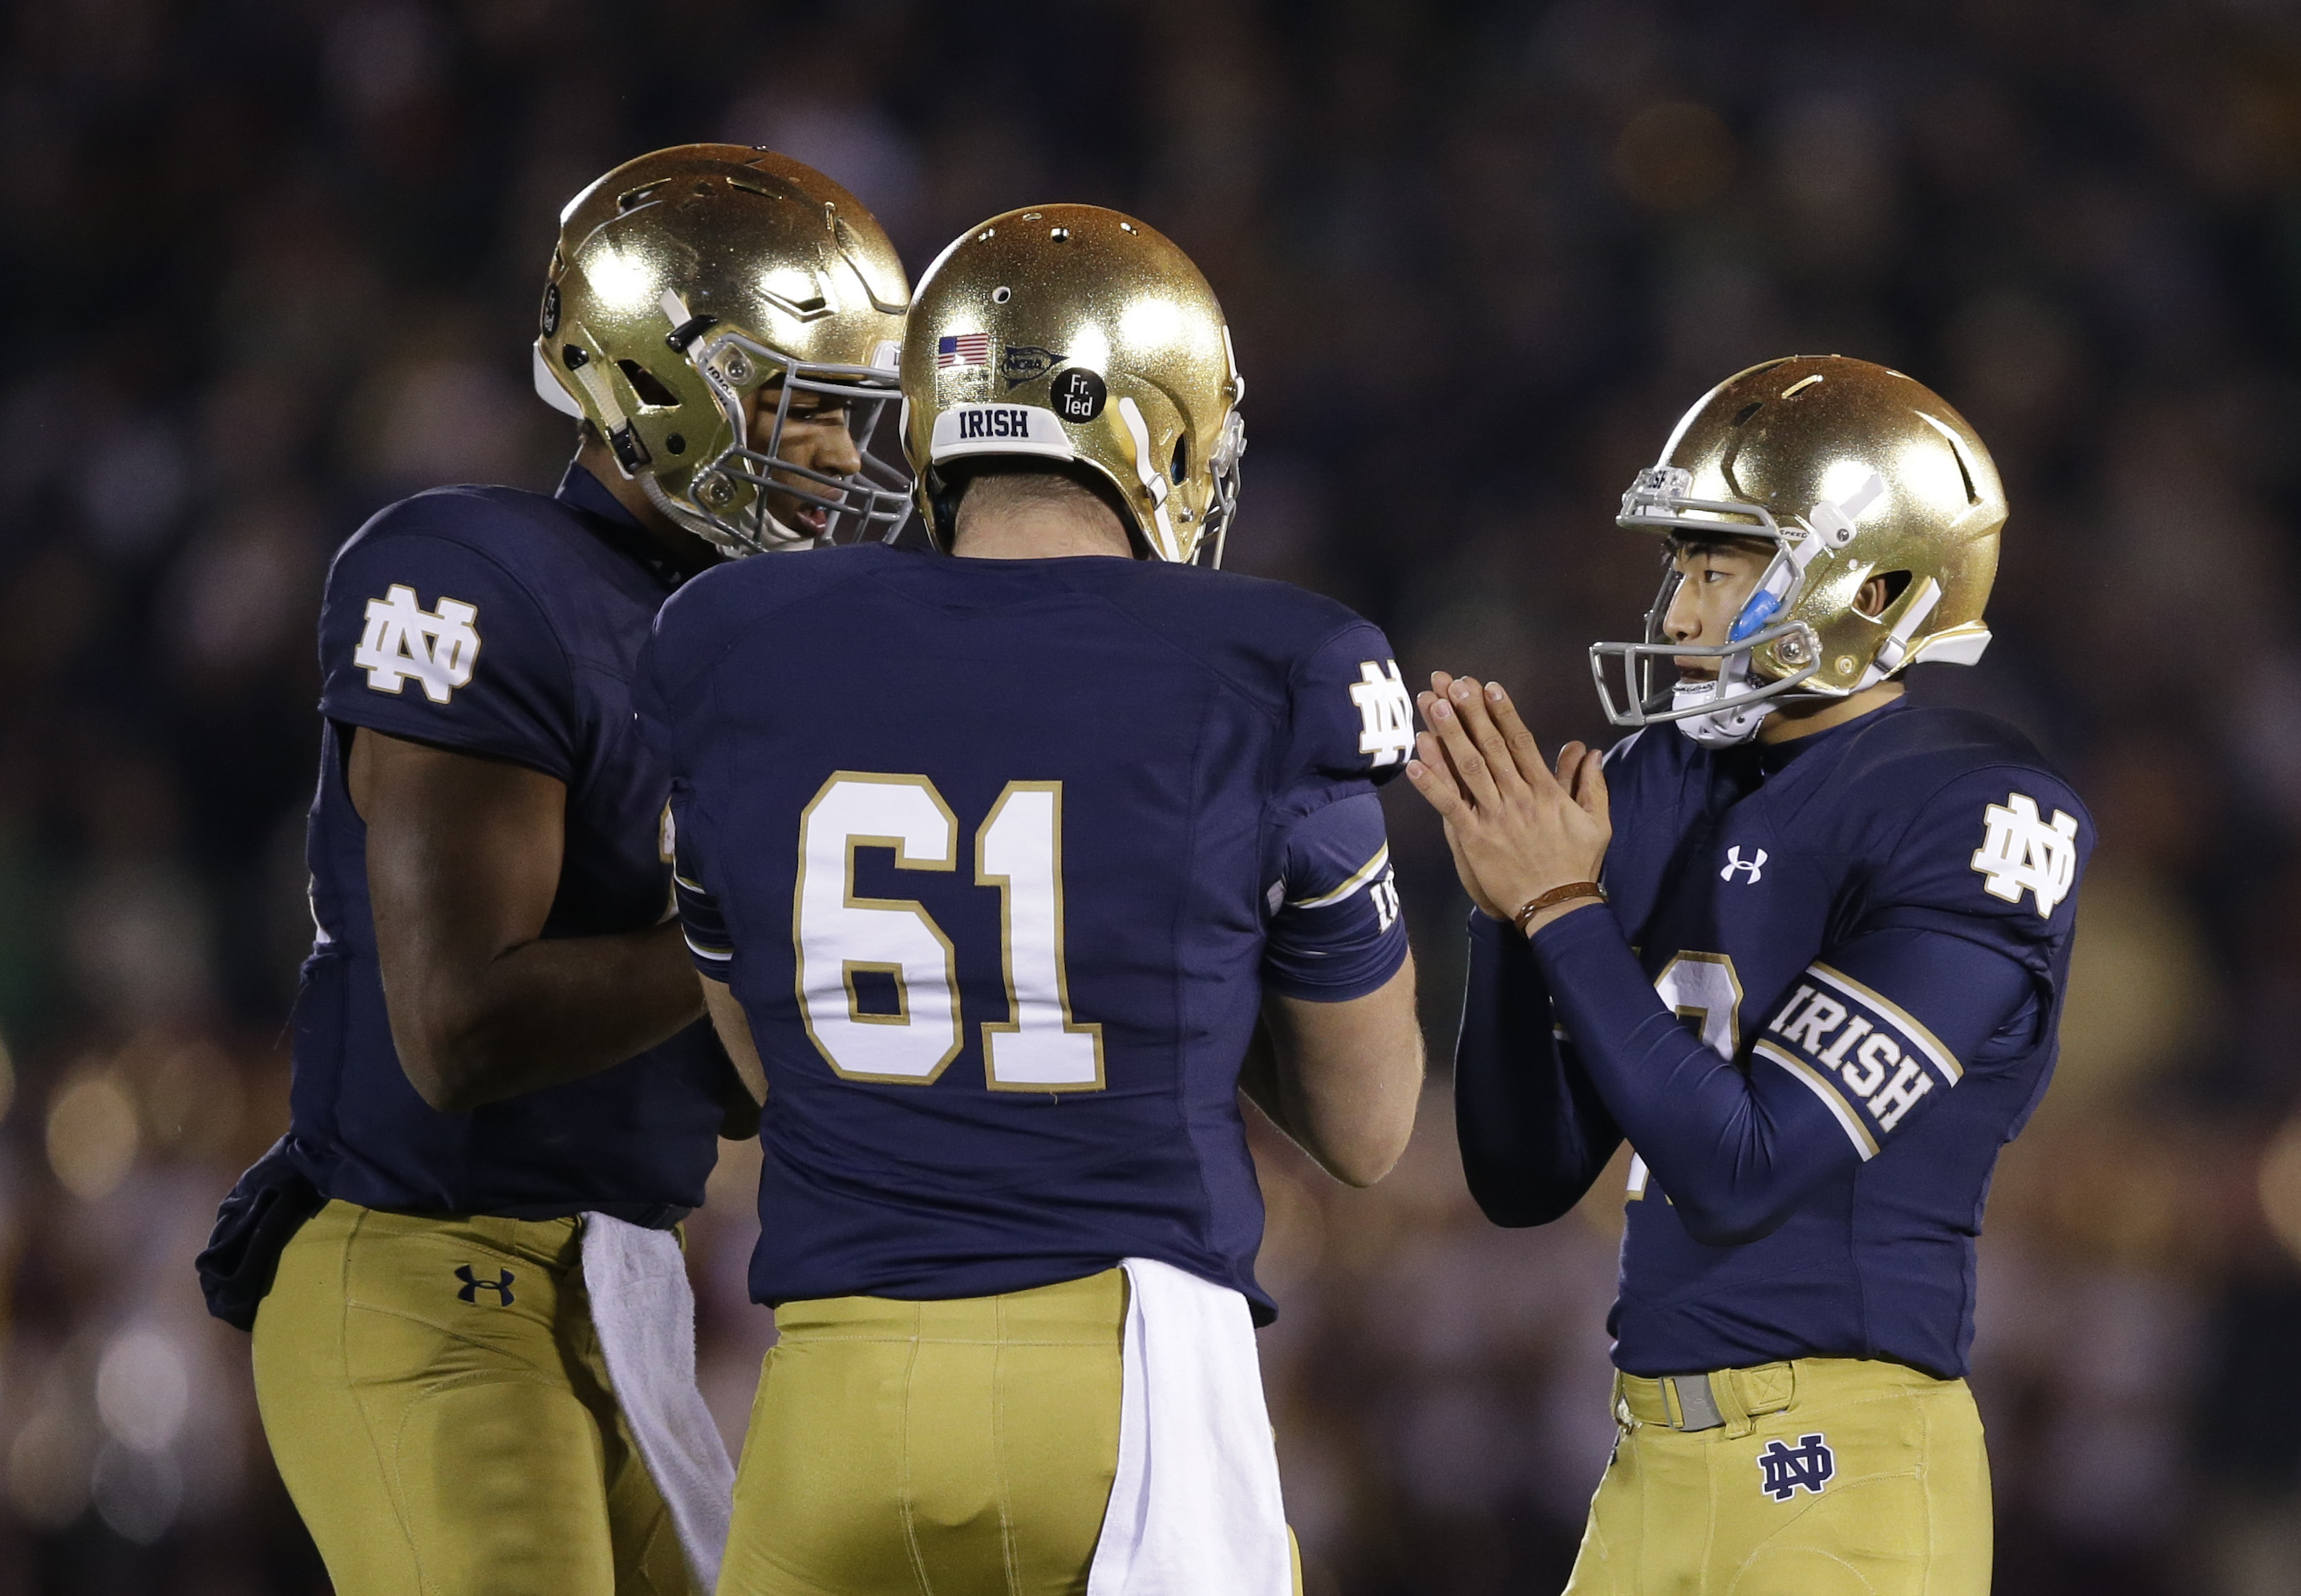 Notre Dame's Justin Yoon, right, celebrates with his teammates after Yoon kicked a 32-yard field goal during the second half of an NCAA college football game against Southern California, Saturday, Oct. 17, 2015, in South Bend, Ind. Notre Dame won the game 41-31. (AP Photo/Darron Cummings)